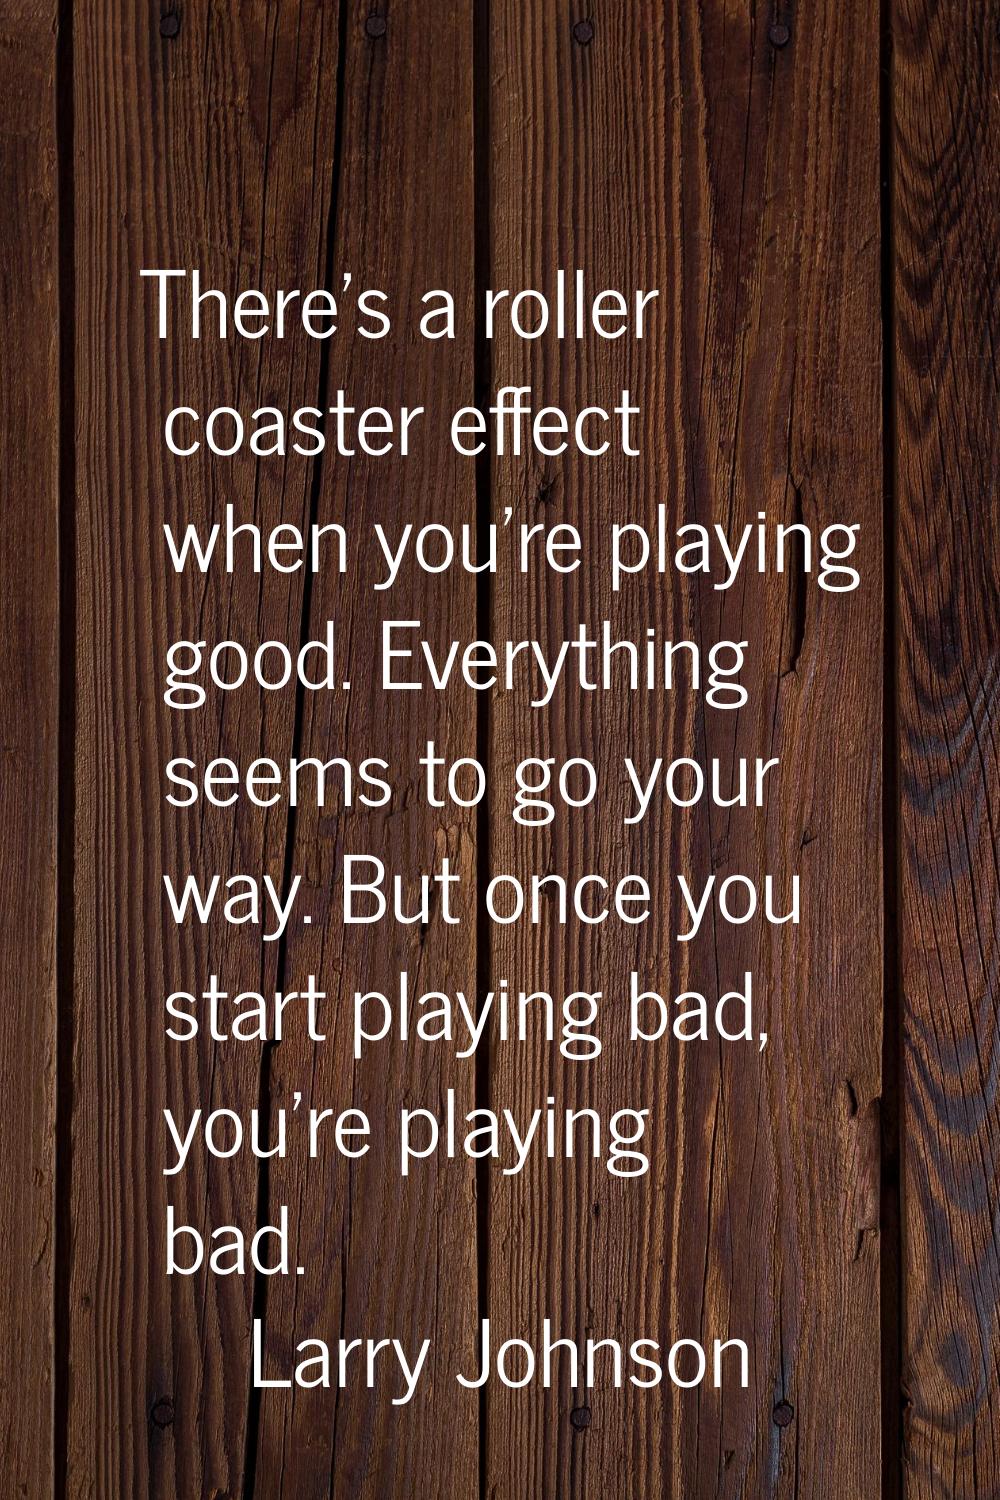 There's a roller coaster effect when you're playing good. Everything seems to go your way. But once